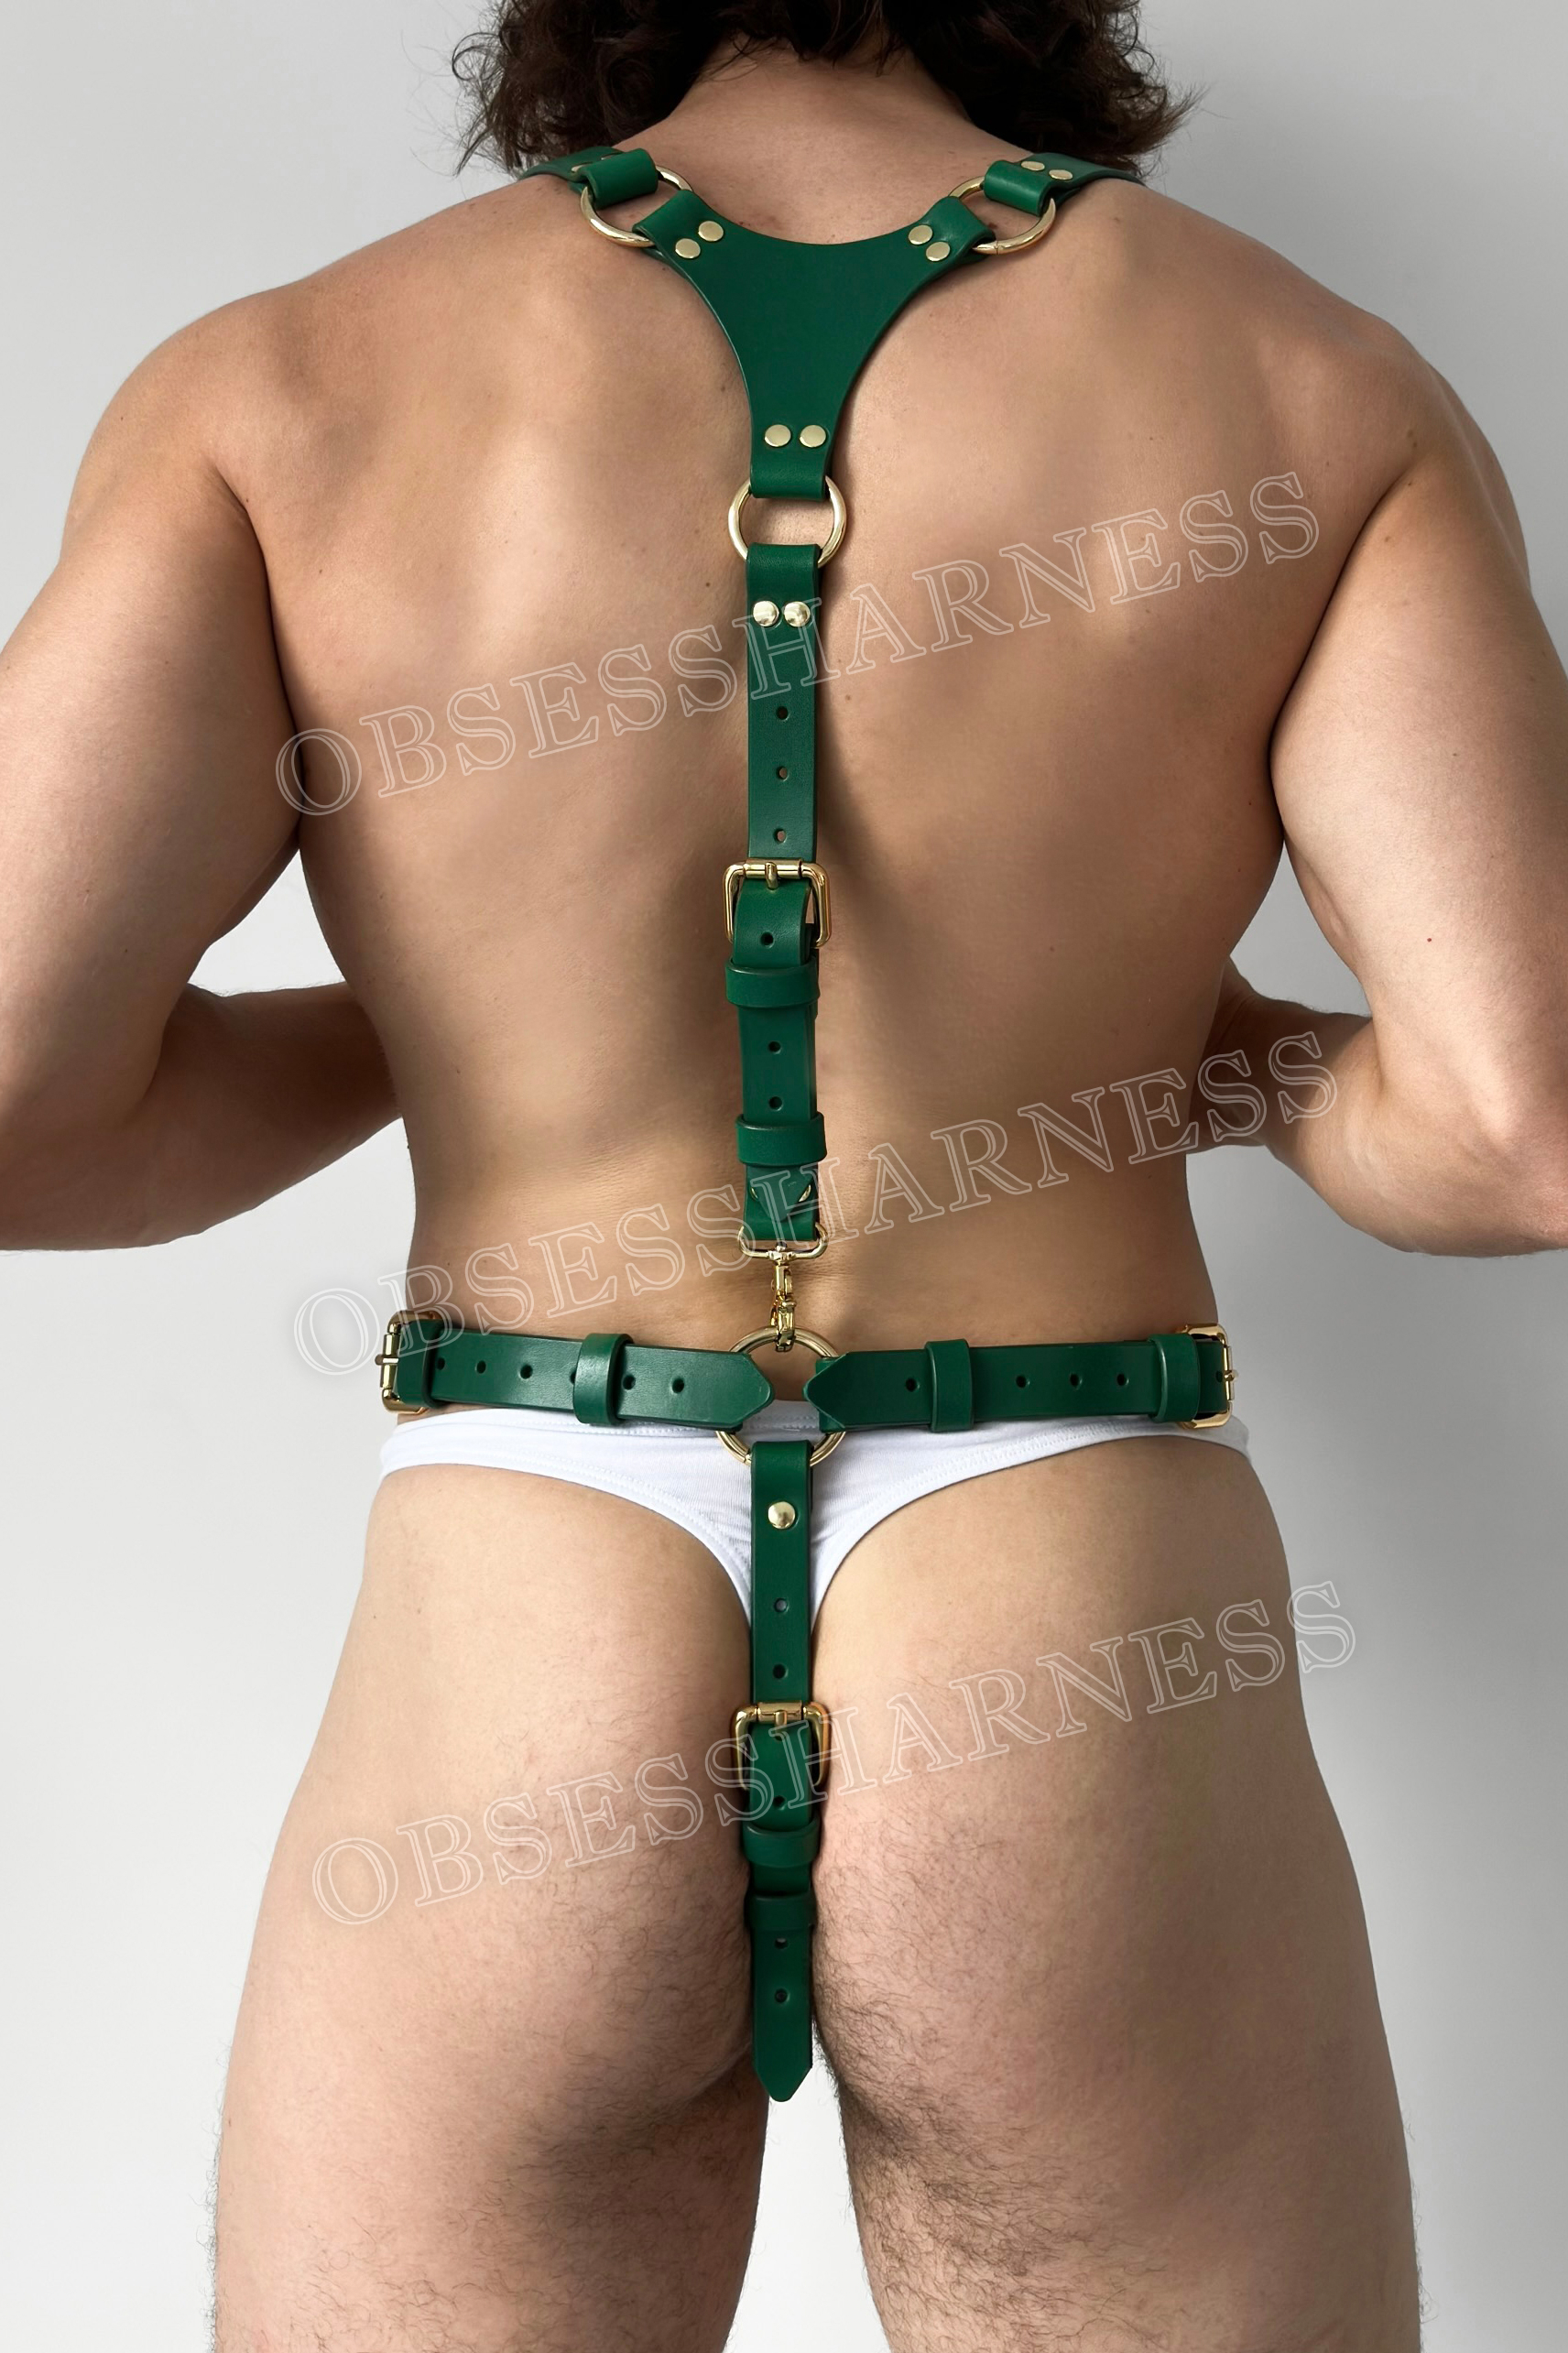 Leather harness Cross full body  cock ring with thong panties and fastened straps for sex and role-playing games